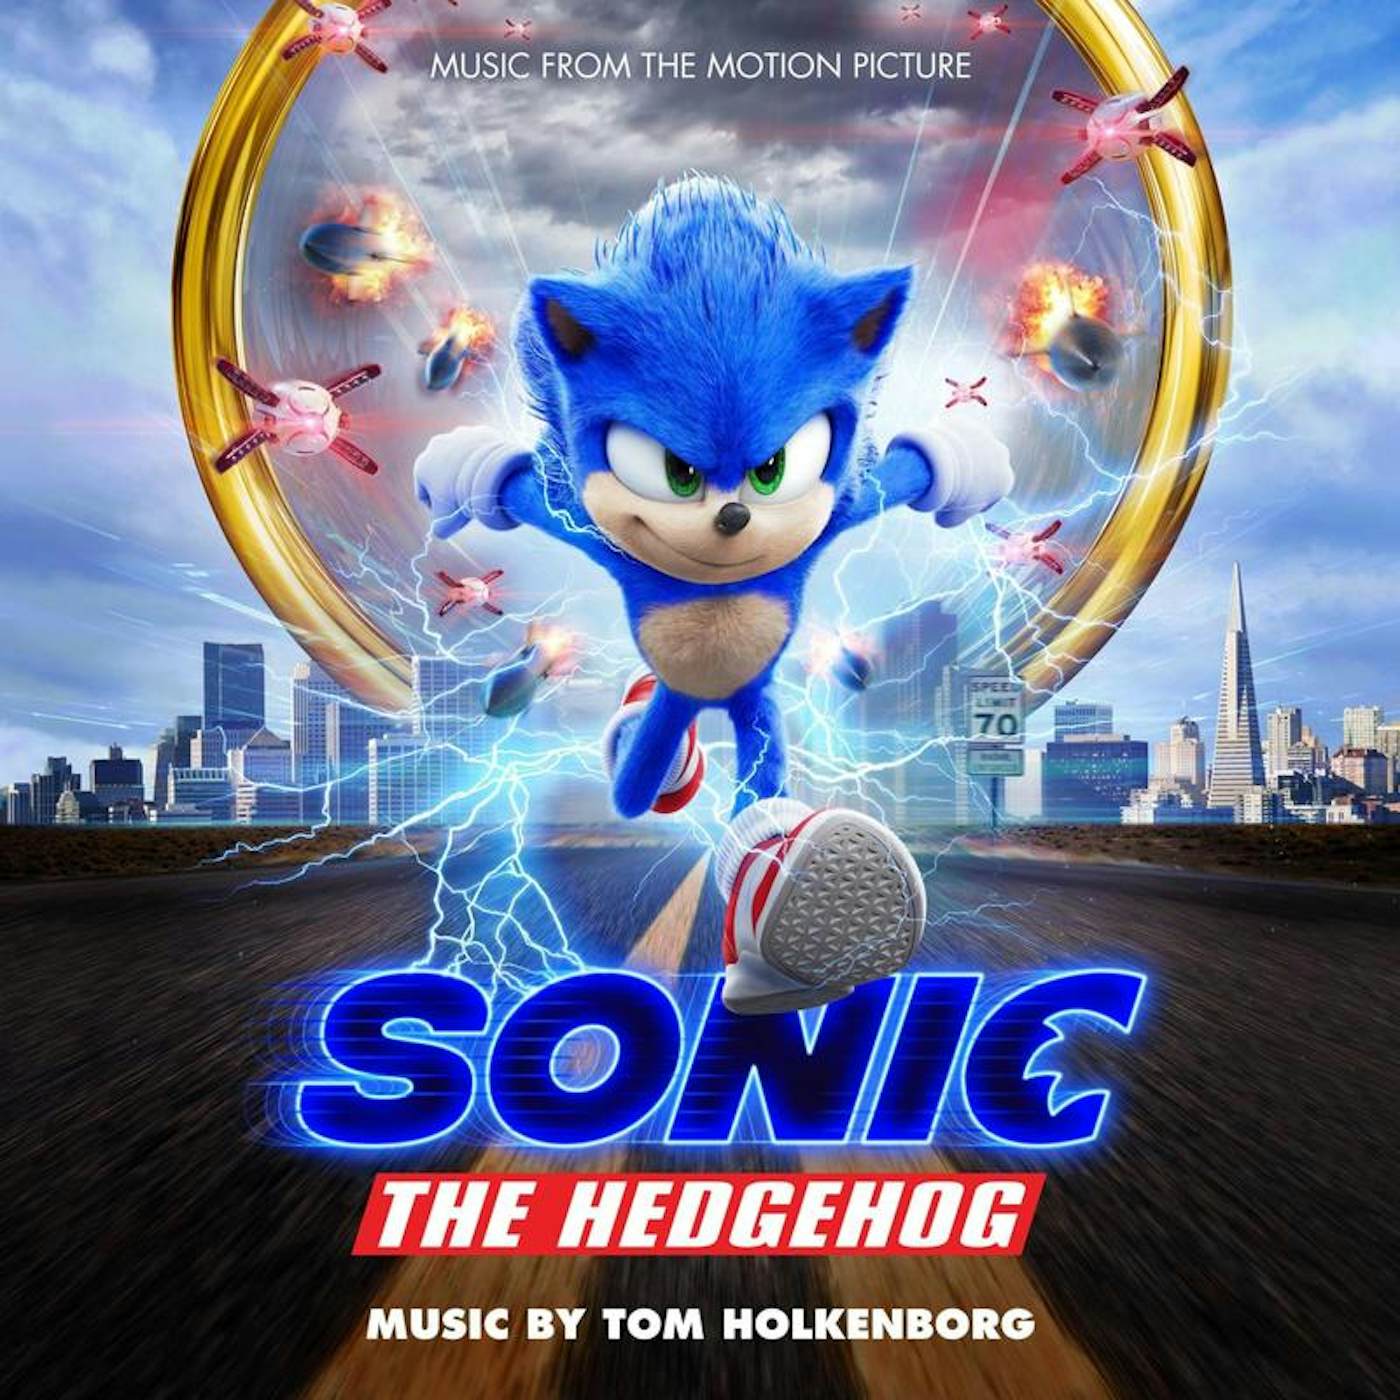 Junkie XL SONIC THE HEDGEHOG: MUSIC FROM THE MOTION PICTURE (BLUE VINYL) Vinyl Record